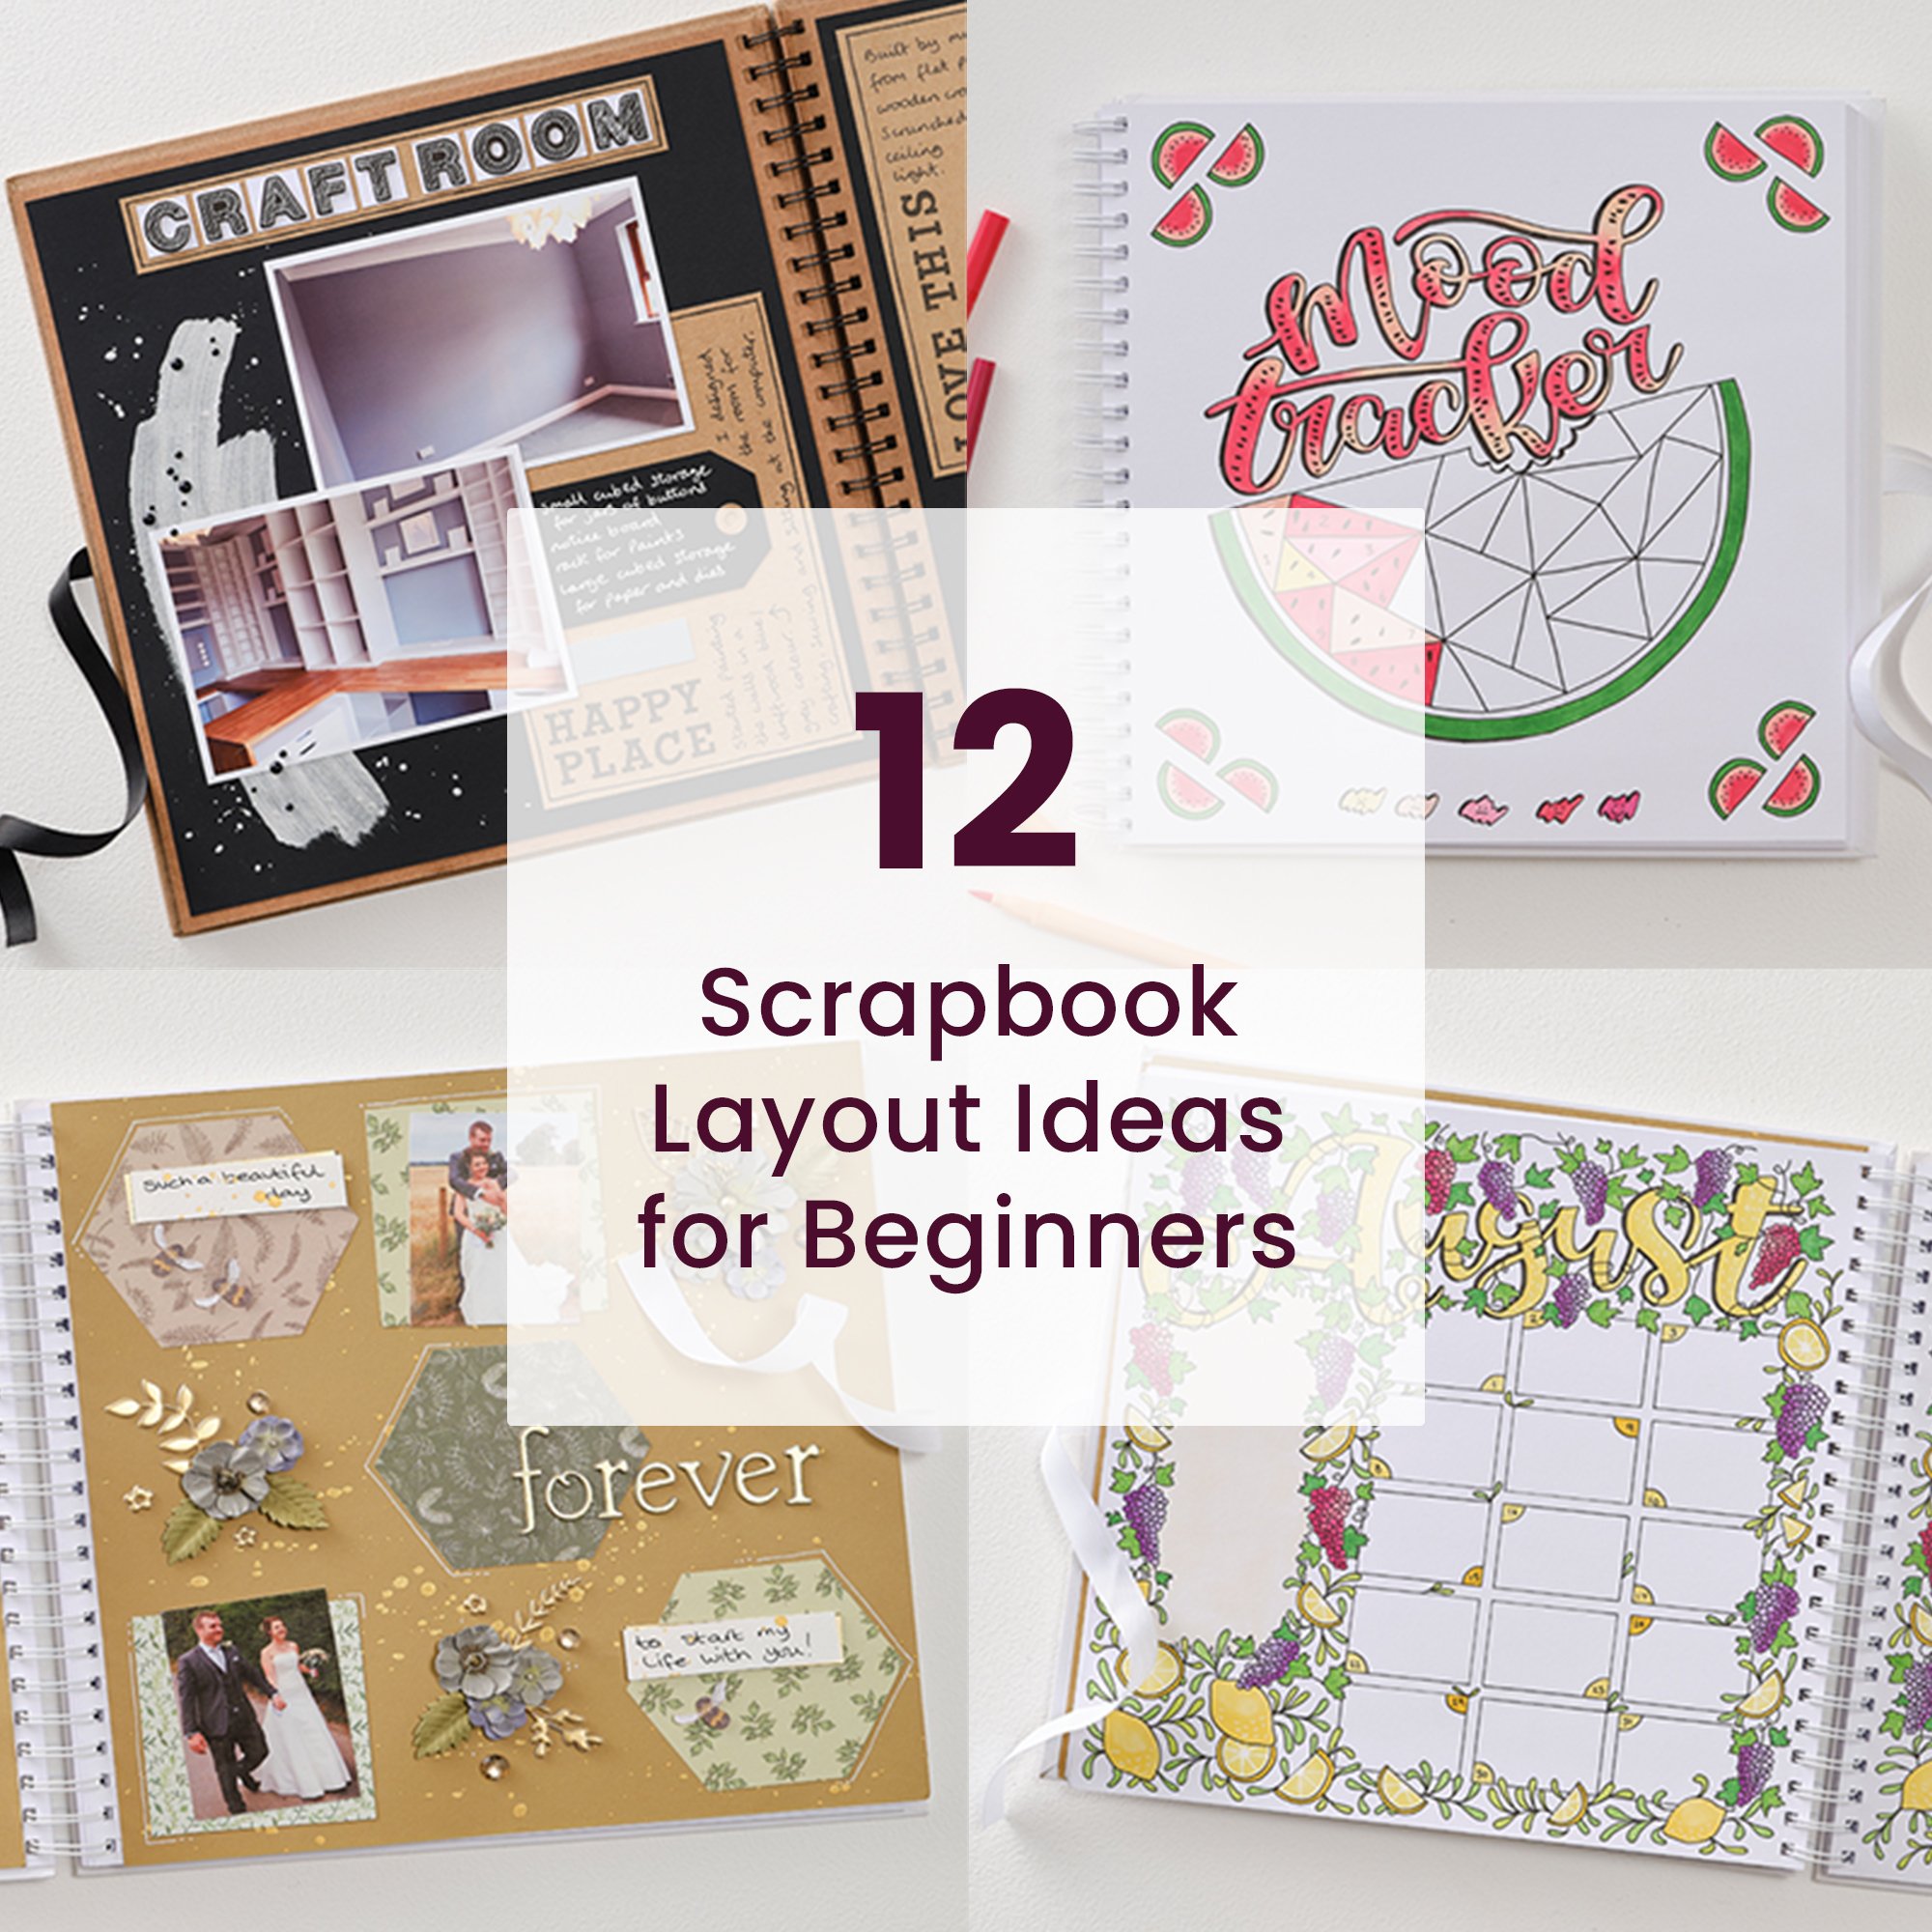 How to Make a Scrapbook of Recipes: 12 Steps (with Pictures)